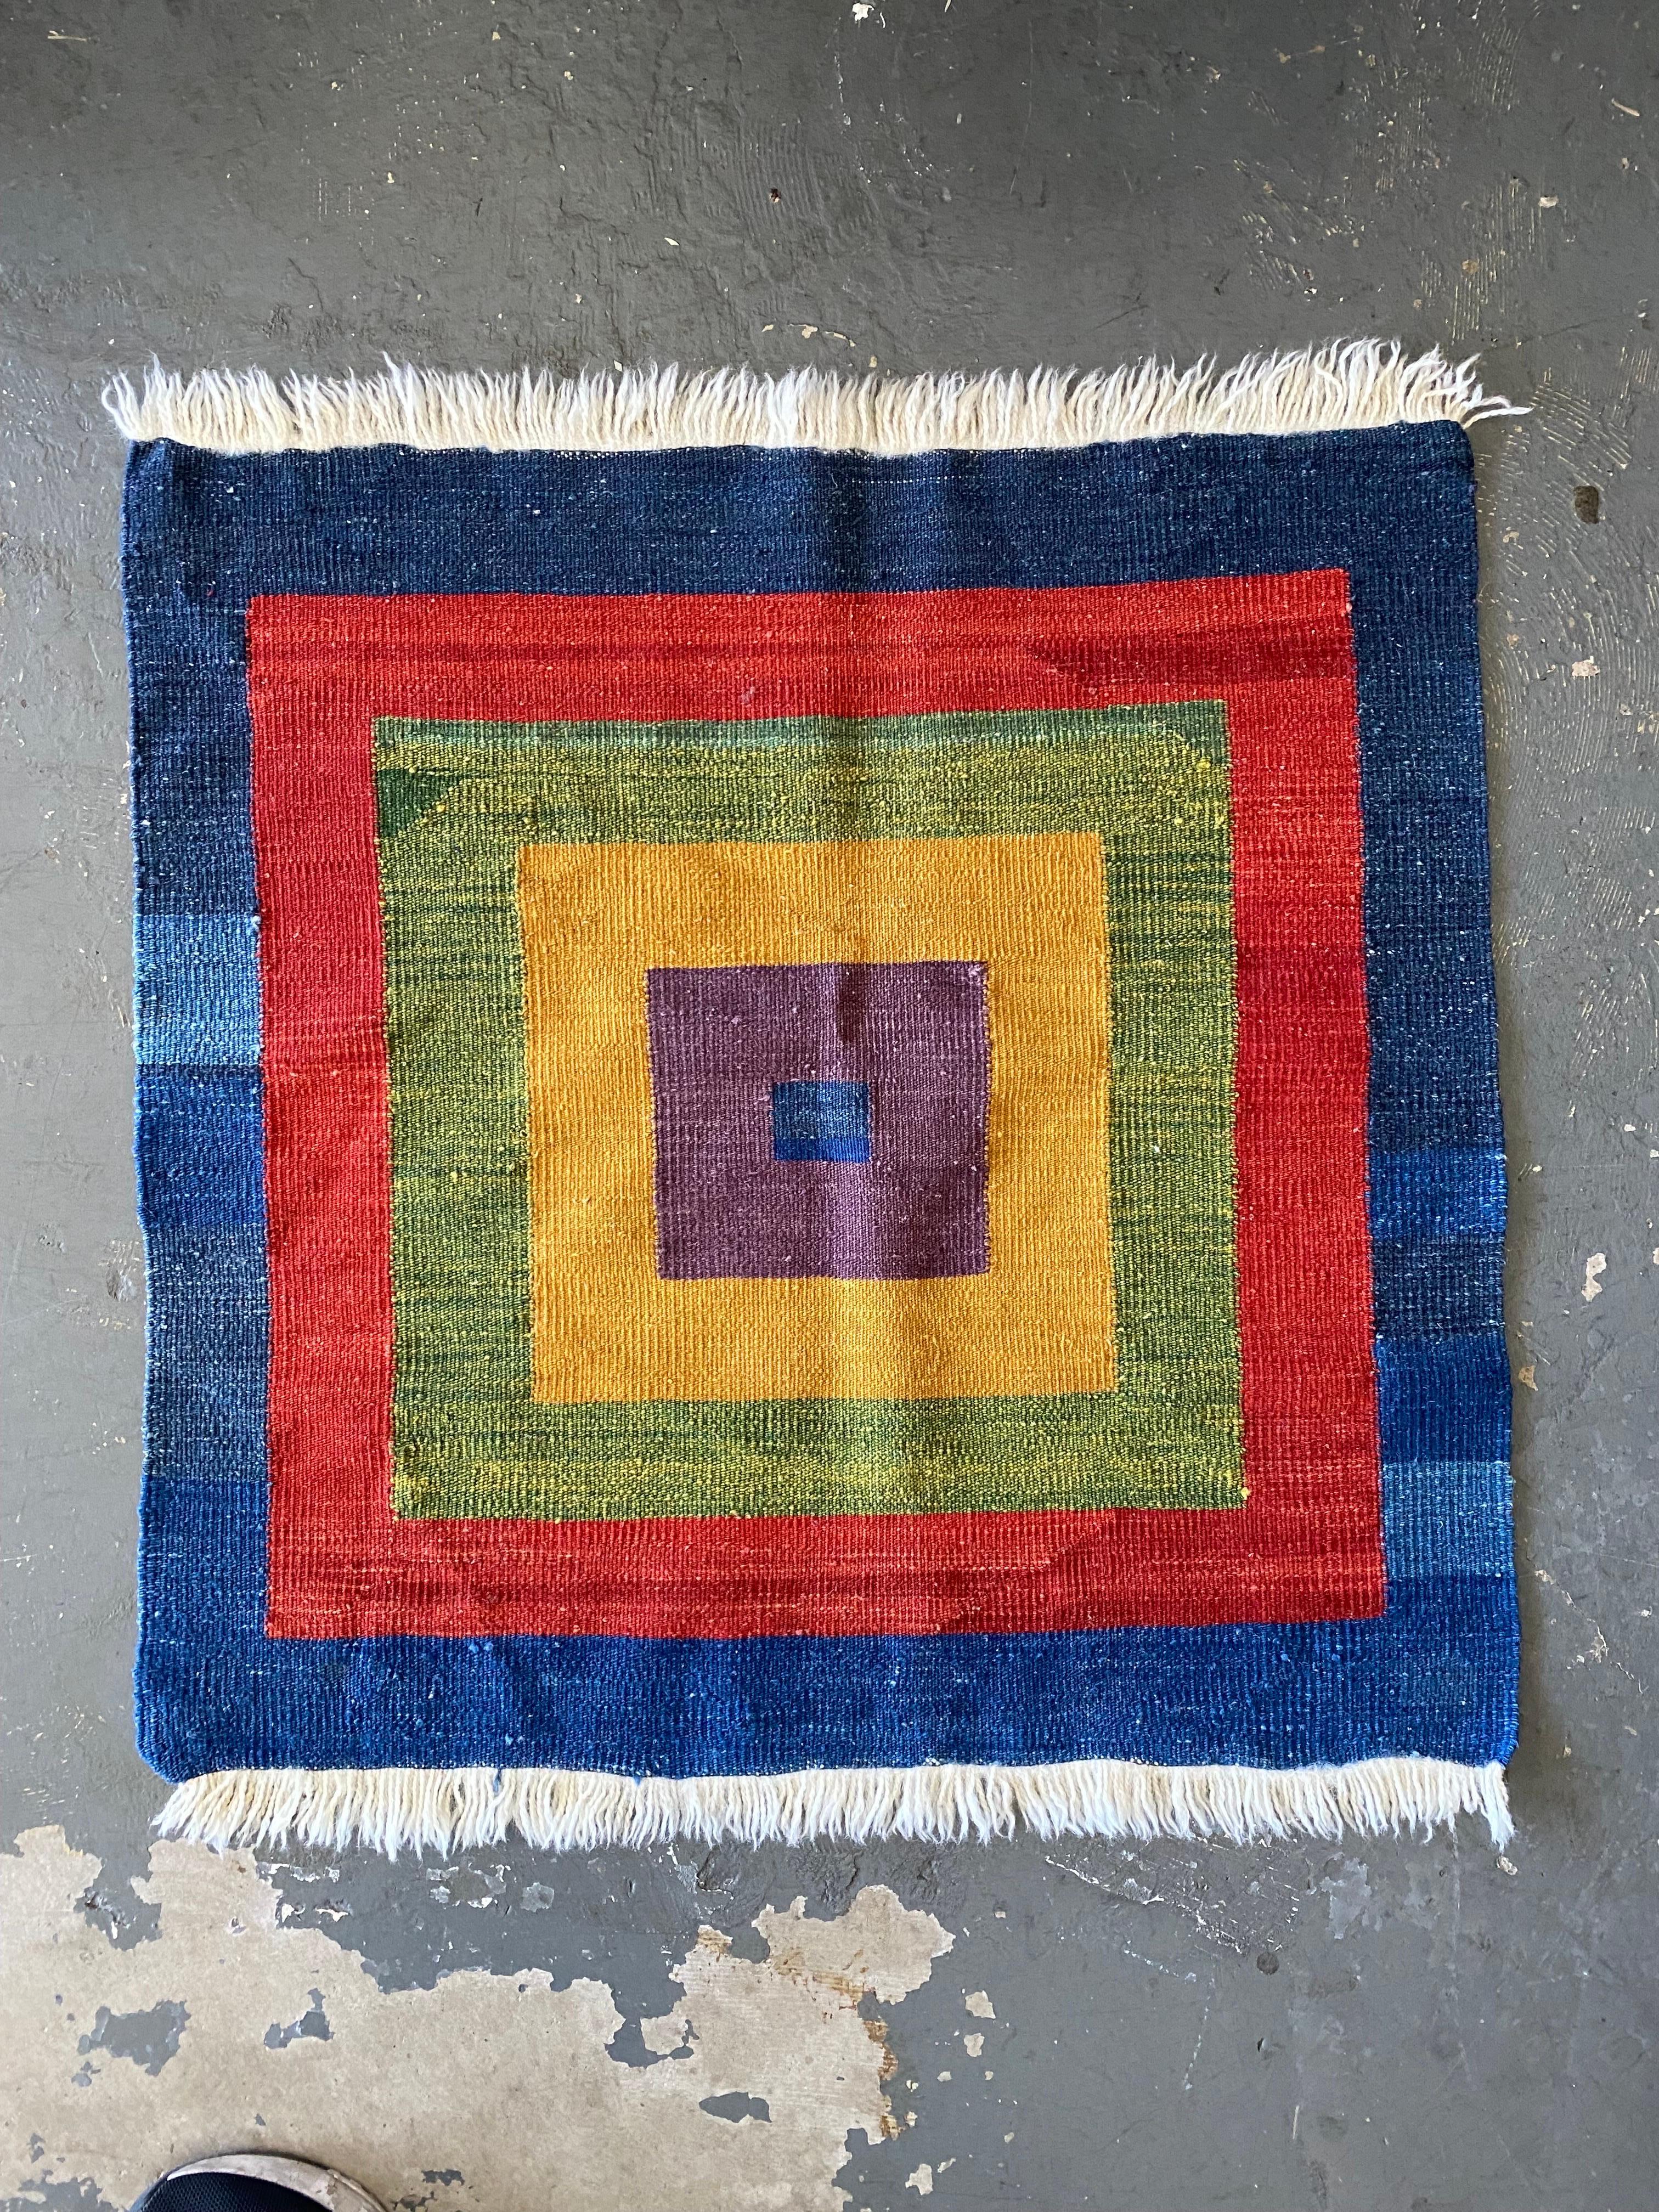 Beautiful Navajo style square rug or tapestry in excellent condition. Perfect to use as a rug in your entry hall, office or where you please. Or use it as a tablecloth or hang it up as wall decoration. 

This wool fabric tapestry is in excellent